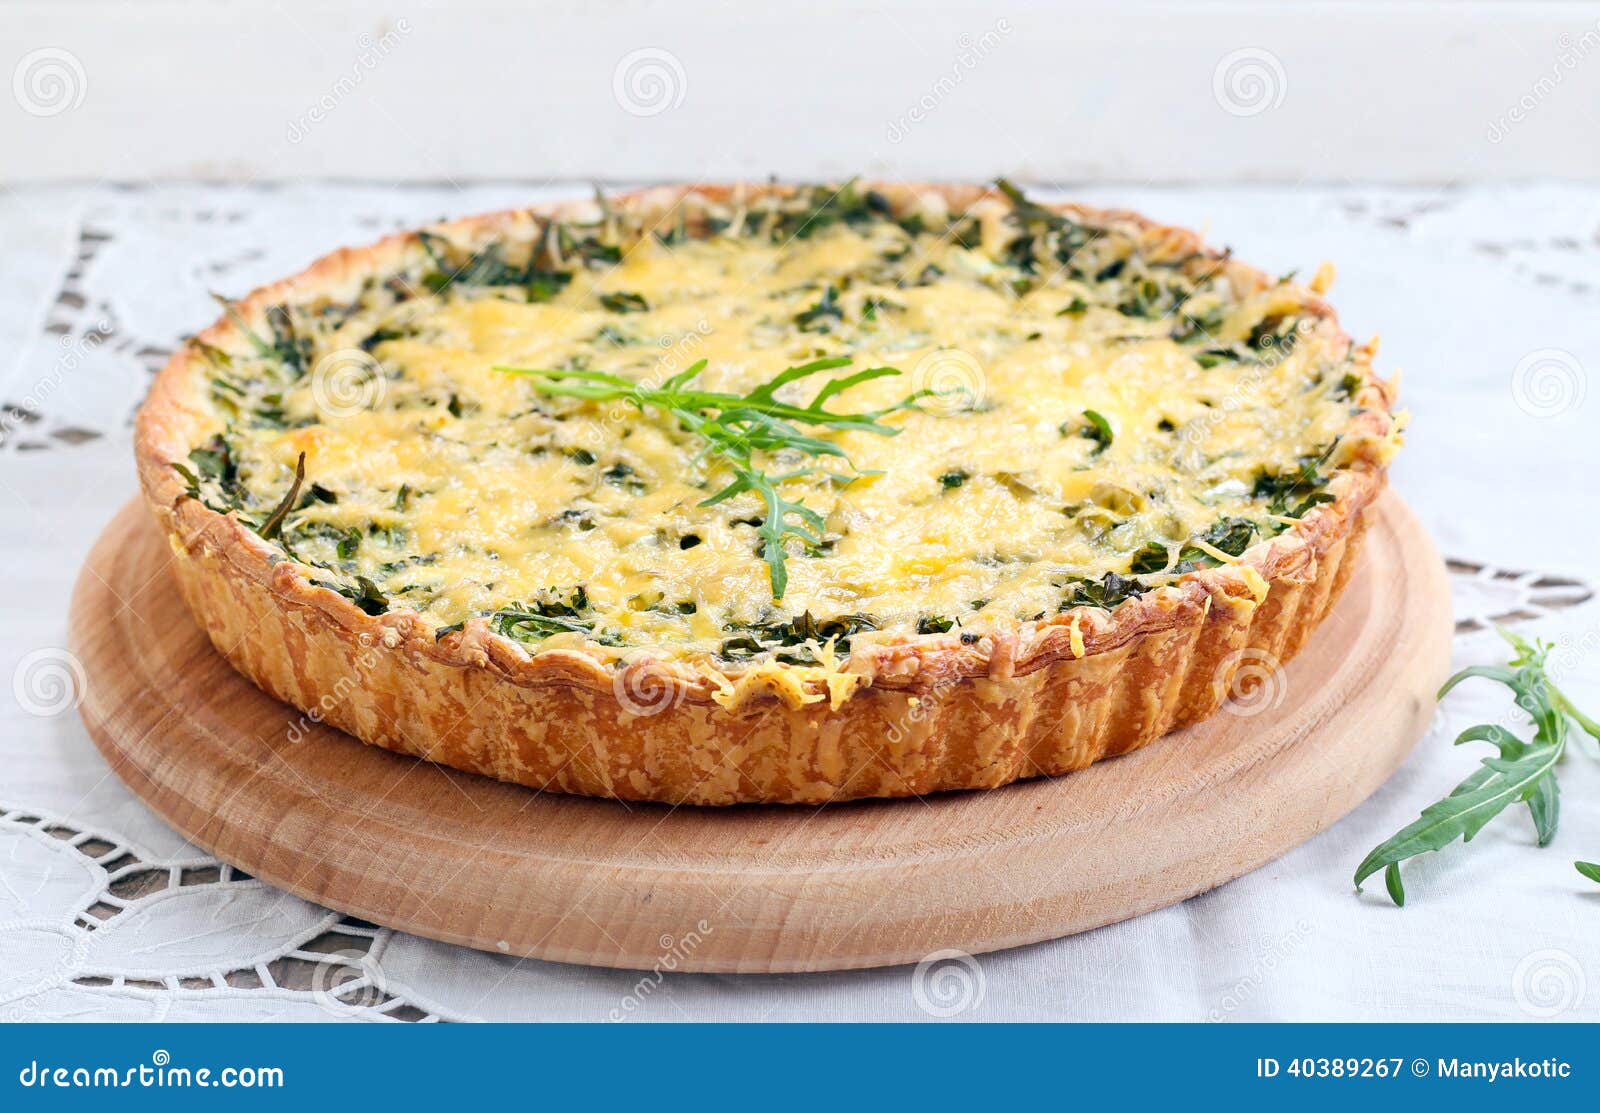 Savory green tart stock image. Image of spinach, green - 40389267